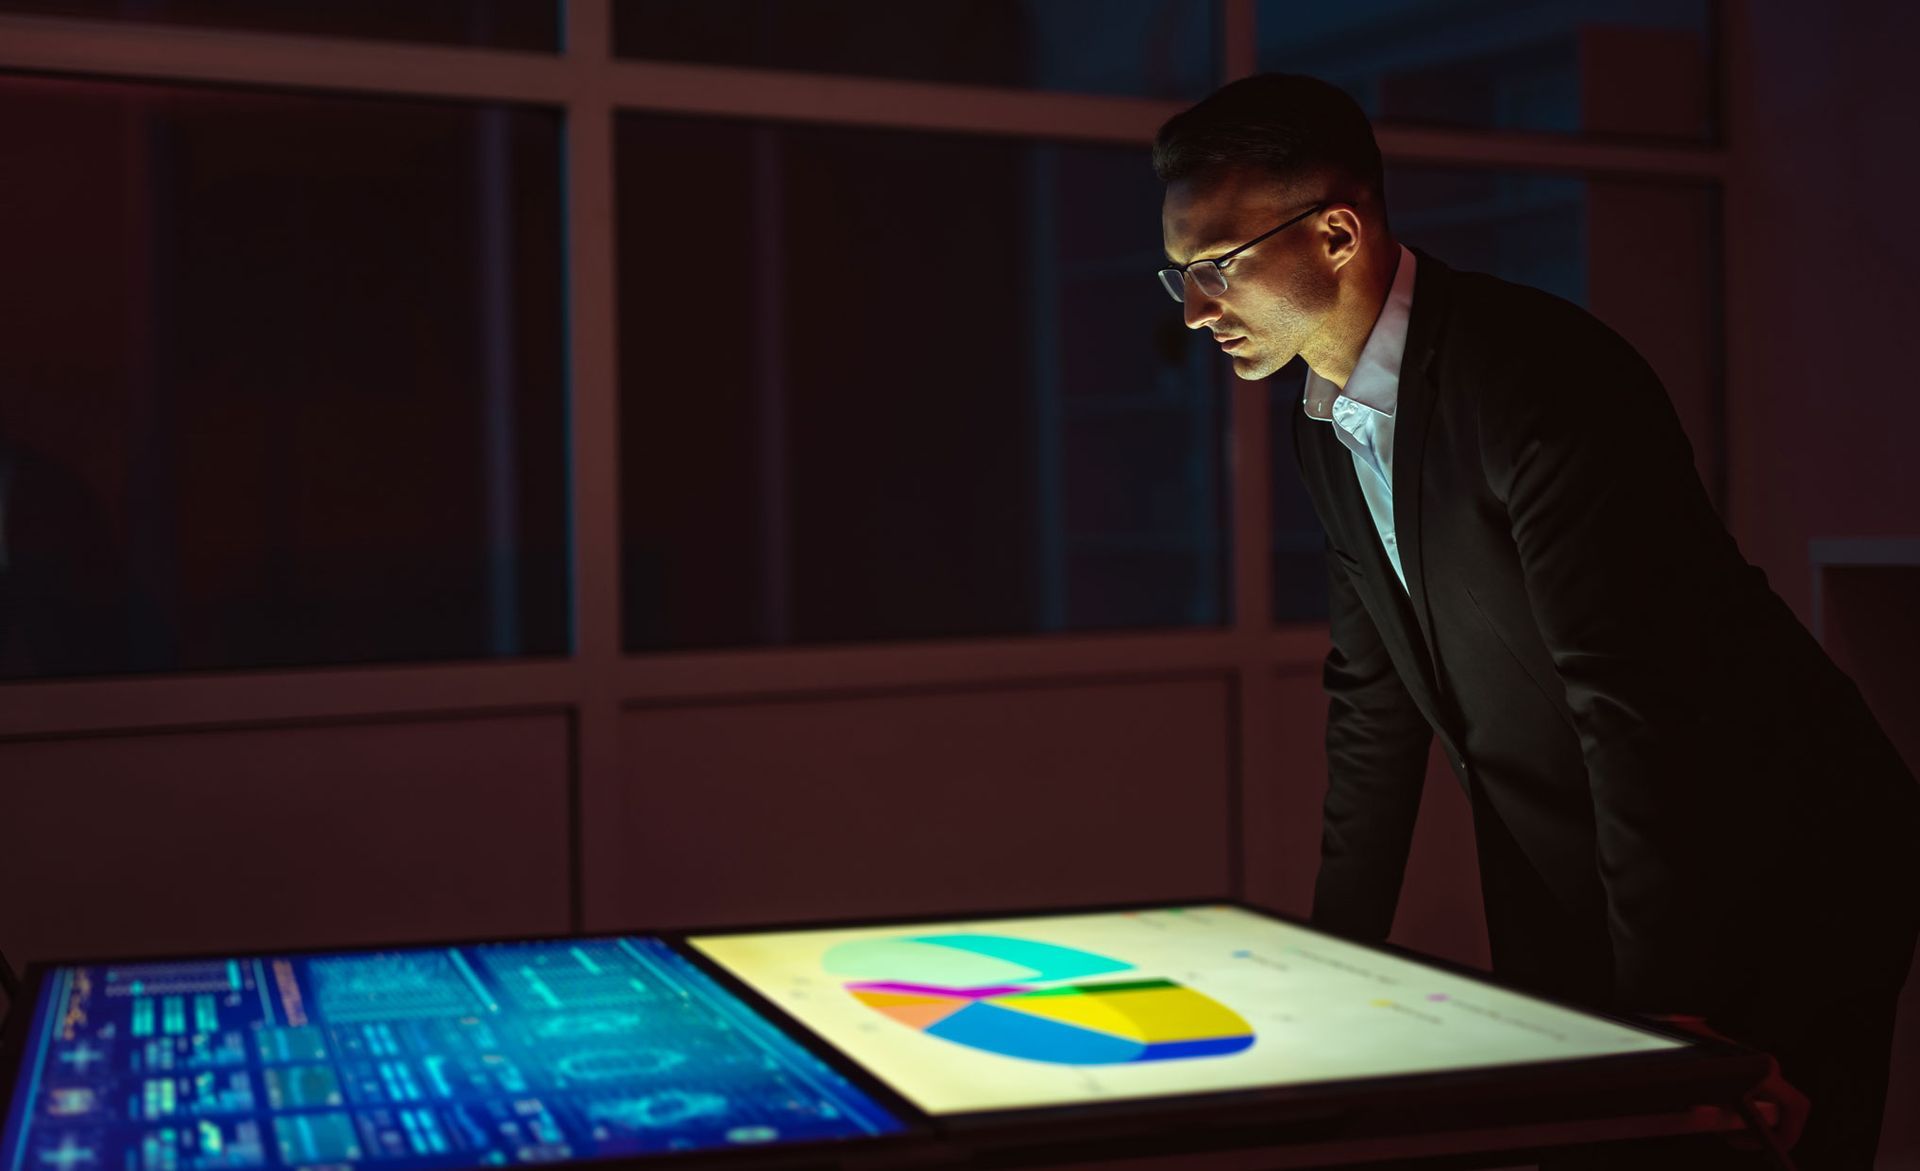 an executive in a suit is looking at a computer screen in a dark room .